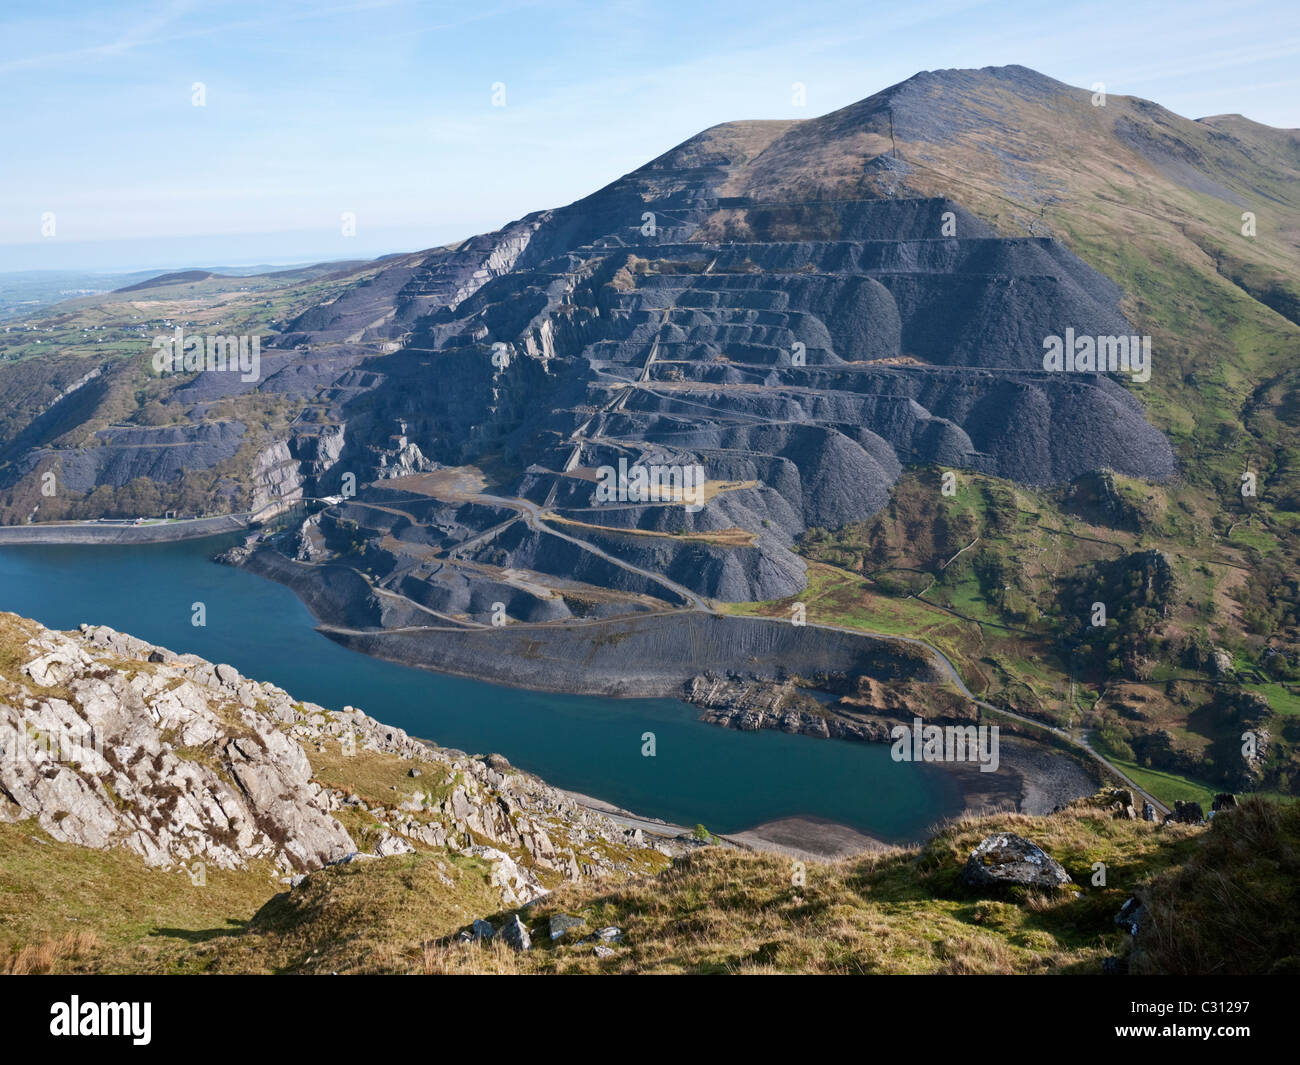 Elidir Fawr viewed from Snowdon, showing the extensive workings of the Dinorwic slate quarry above Llyn Peris Stock Photo